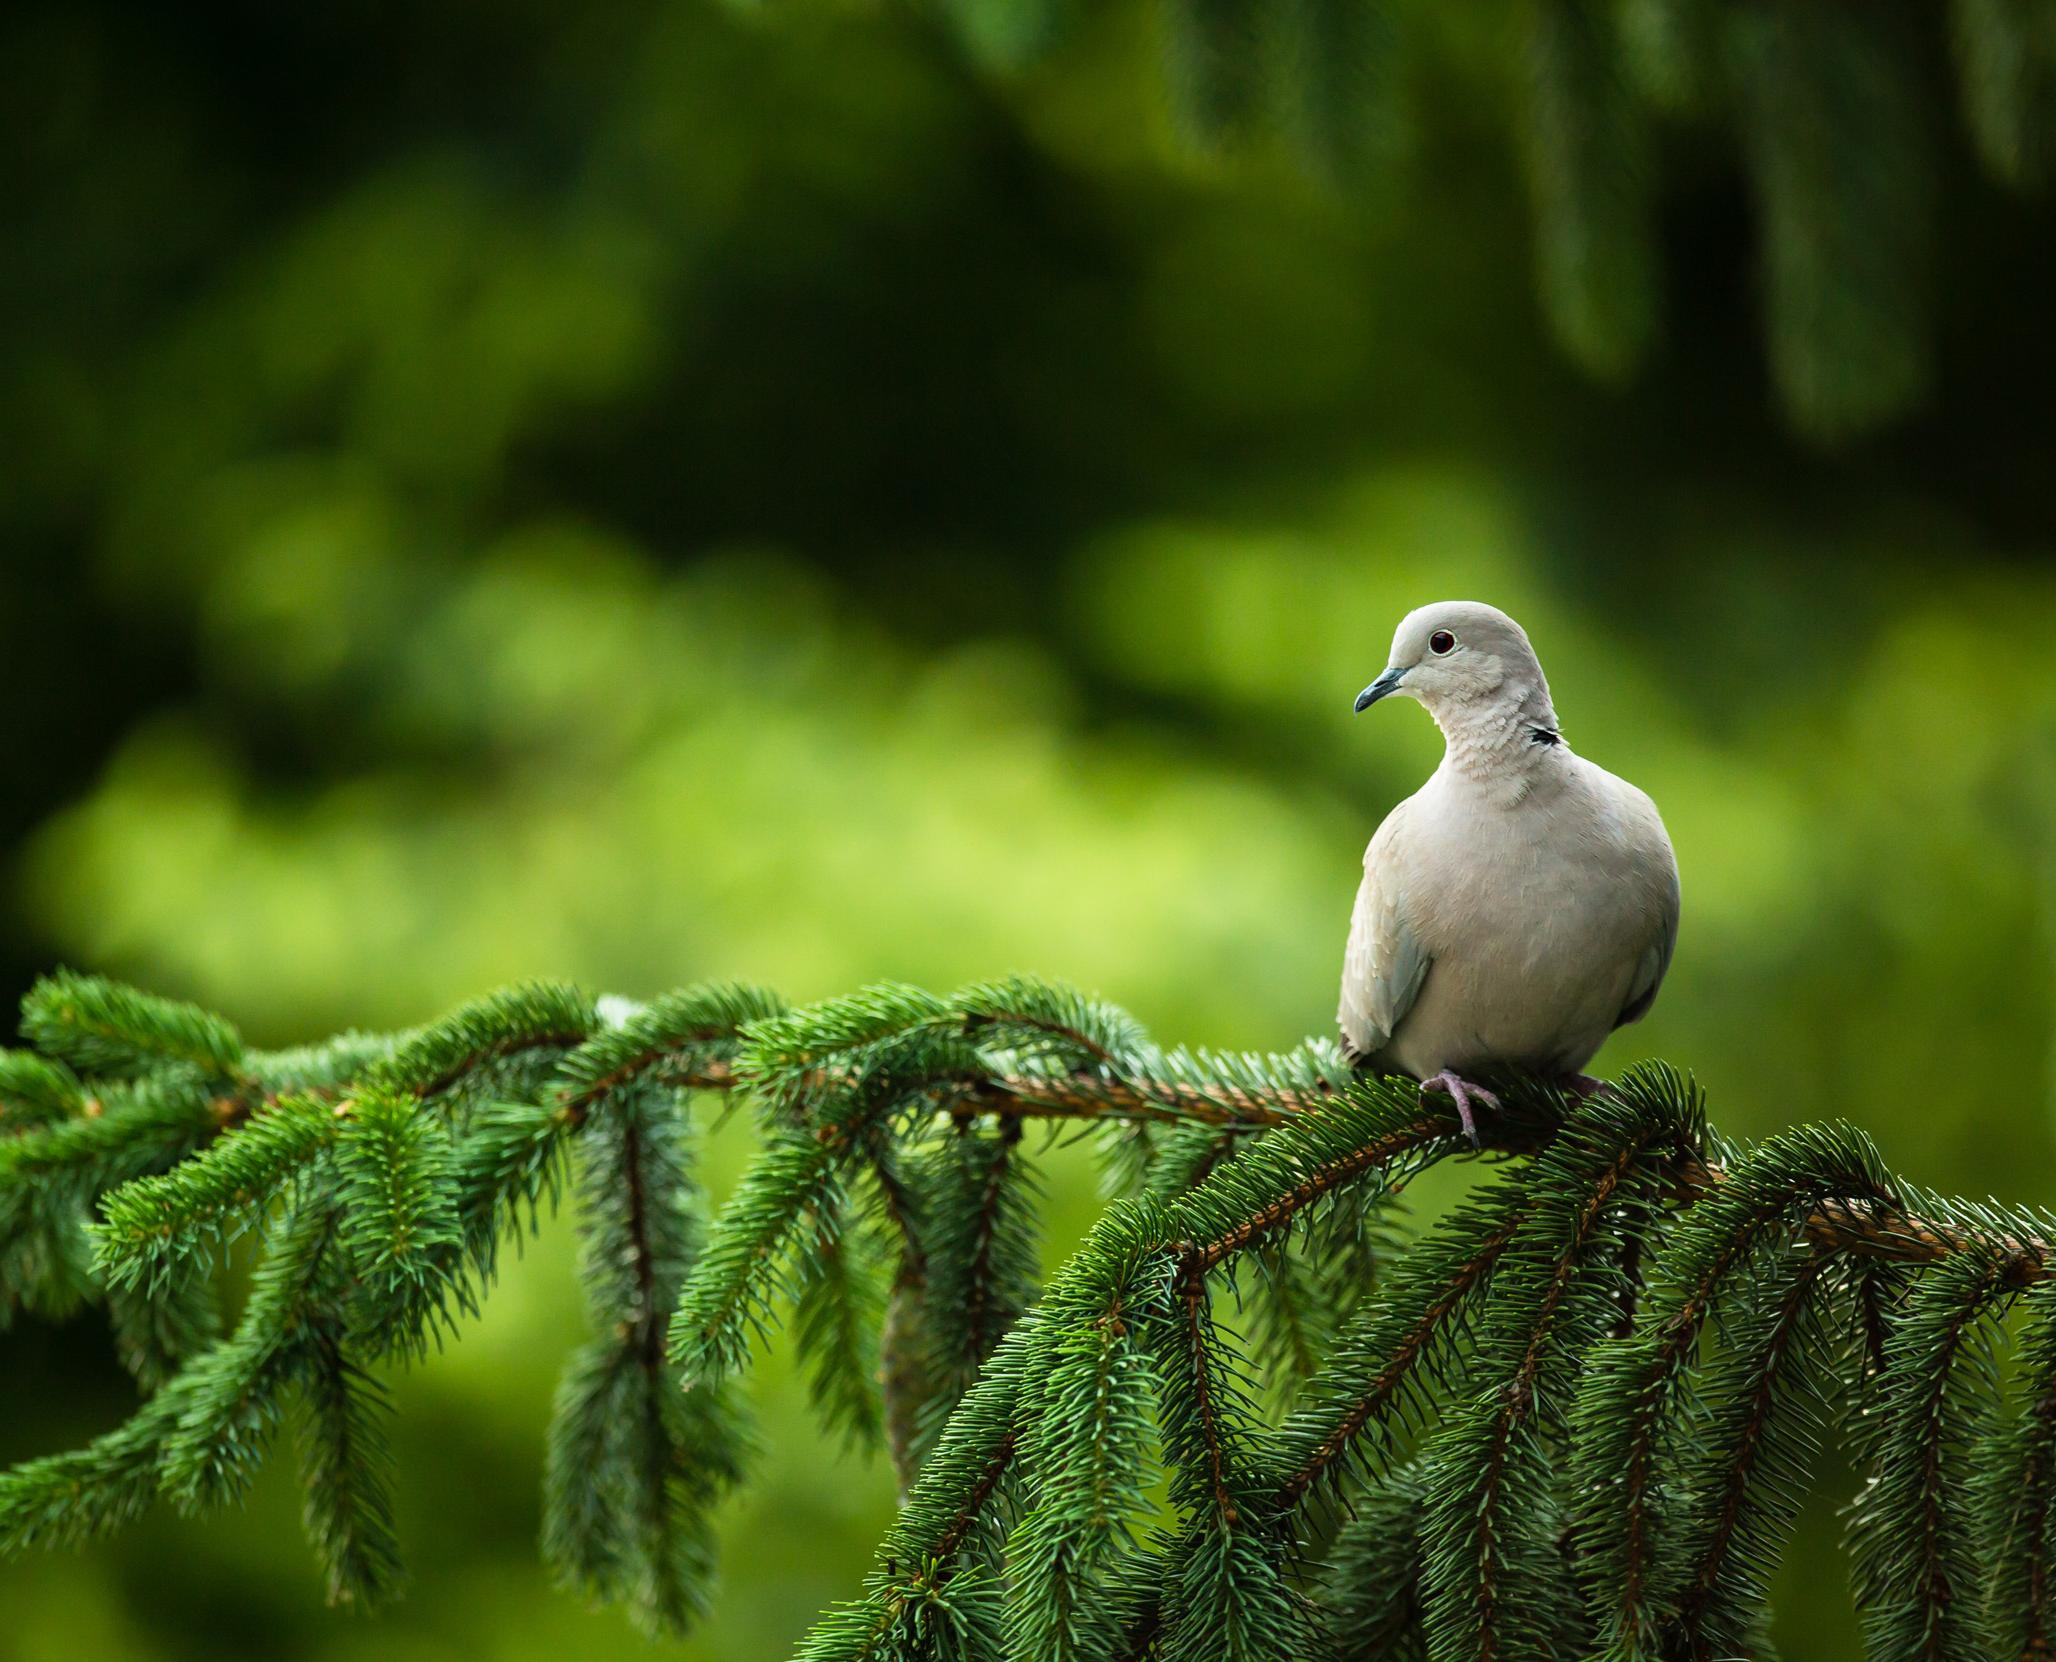 A Collard Dove perched on a long pine branch, looking to its left.